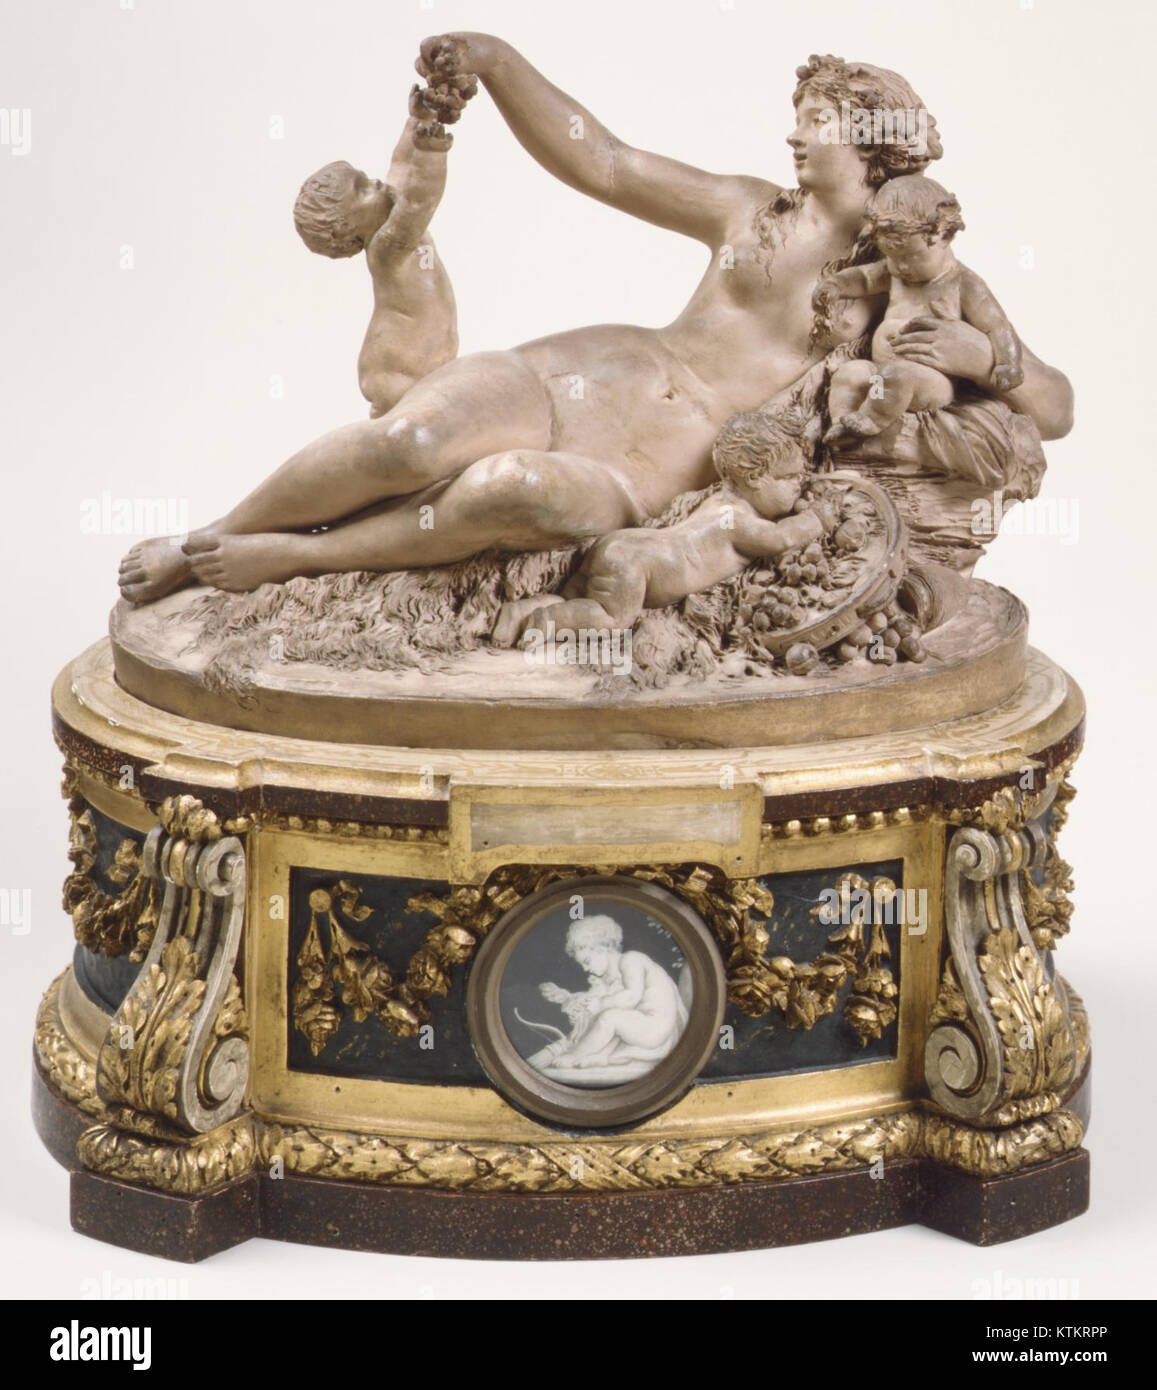 Bust of a bacchante. Artist: Nicola Morelli (Italian, 1771-1838). Culture:  Italian, Rome. Dimensions: Overall (confirmed): 1 3/4 x 1 5/16 in. (4.4 x  3.4 cm); visible cameo: 41.7 x 32.5 mm. Date